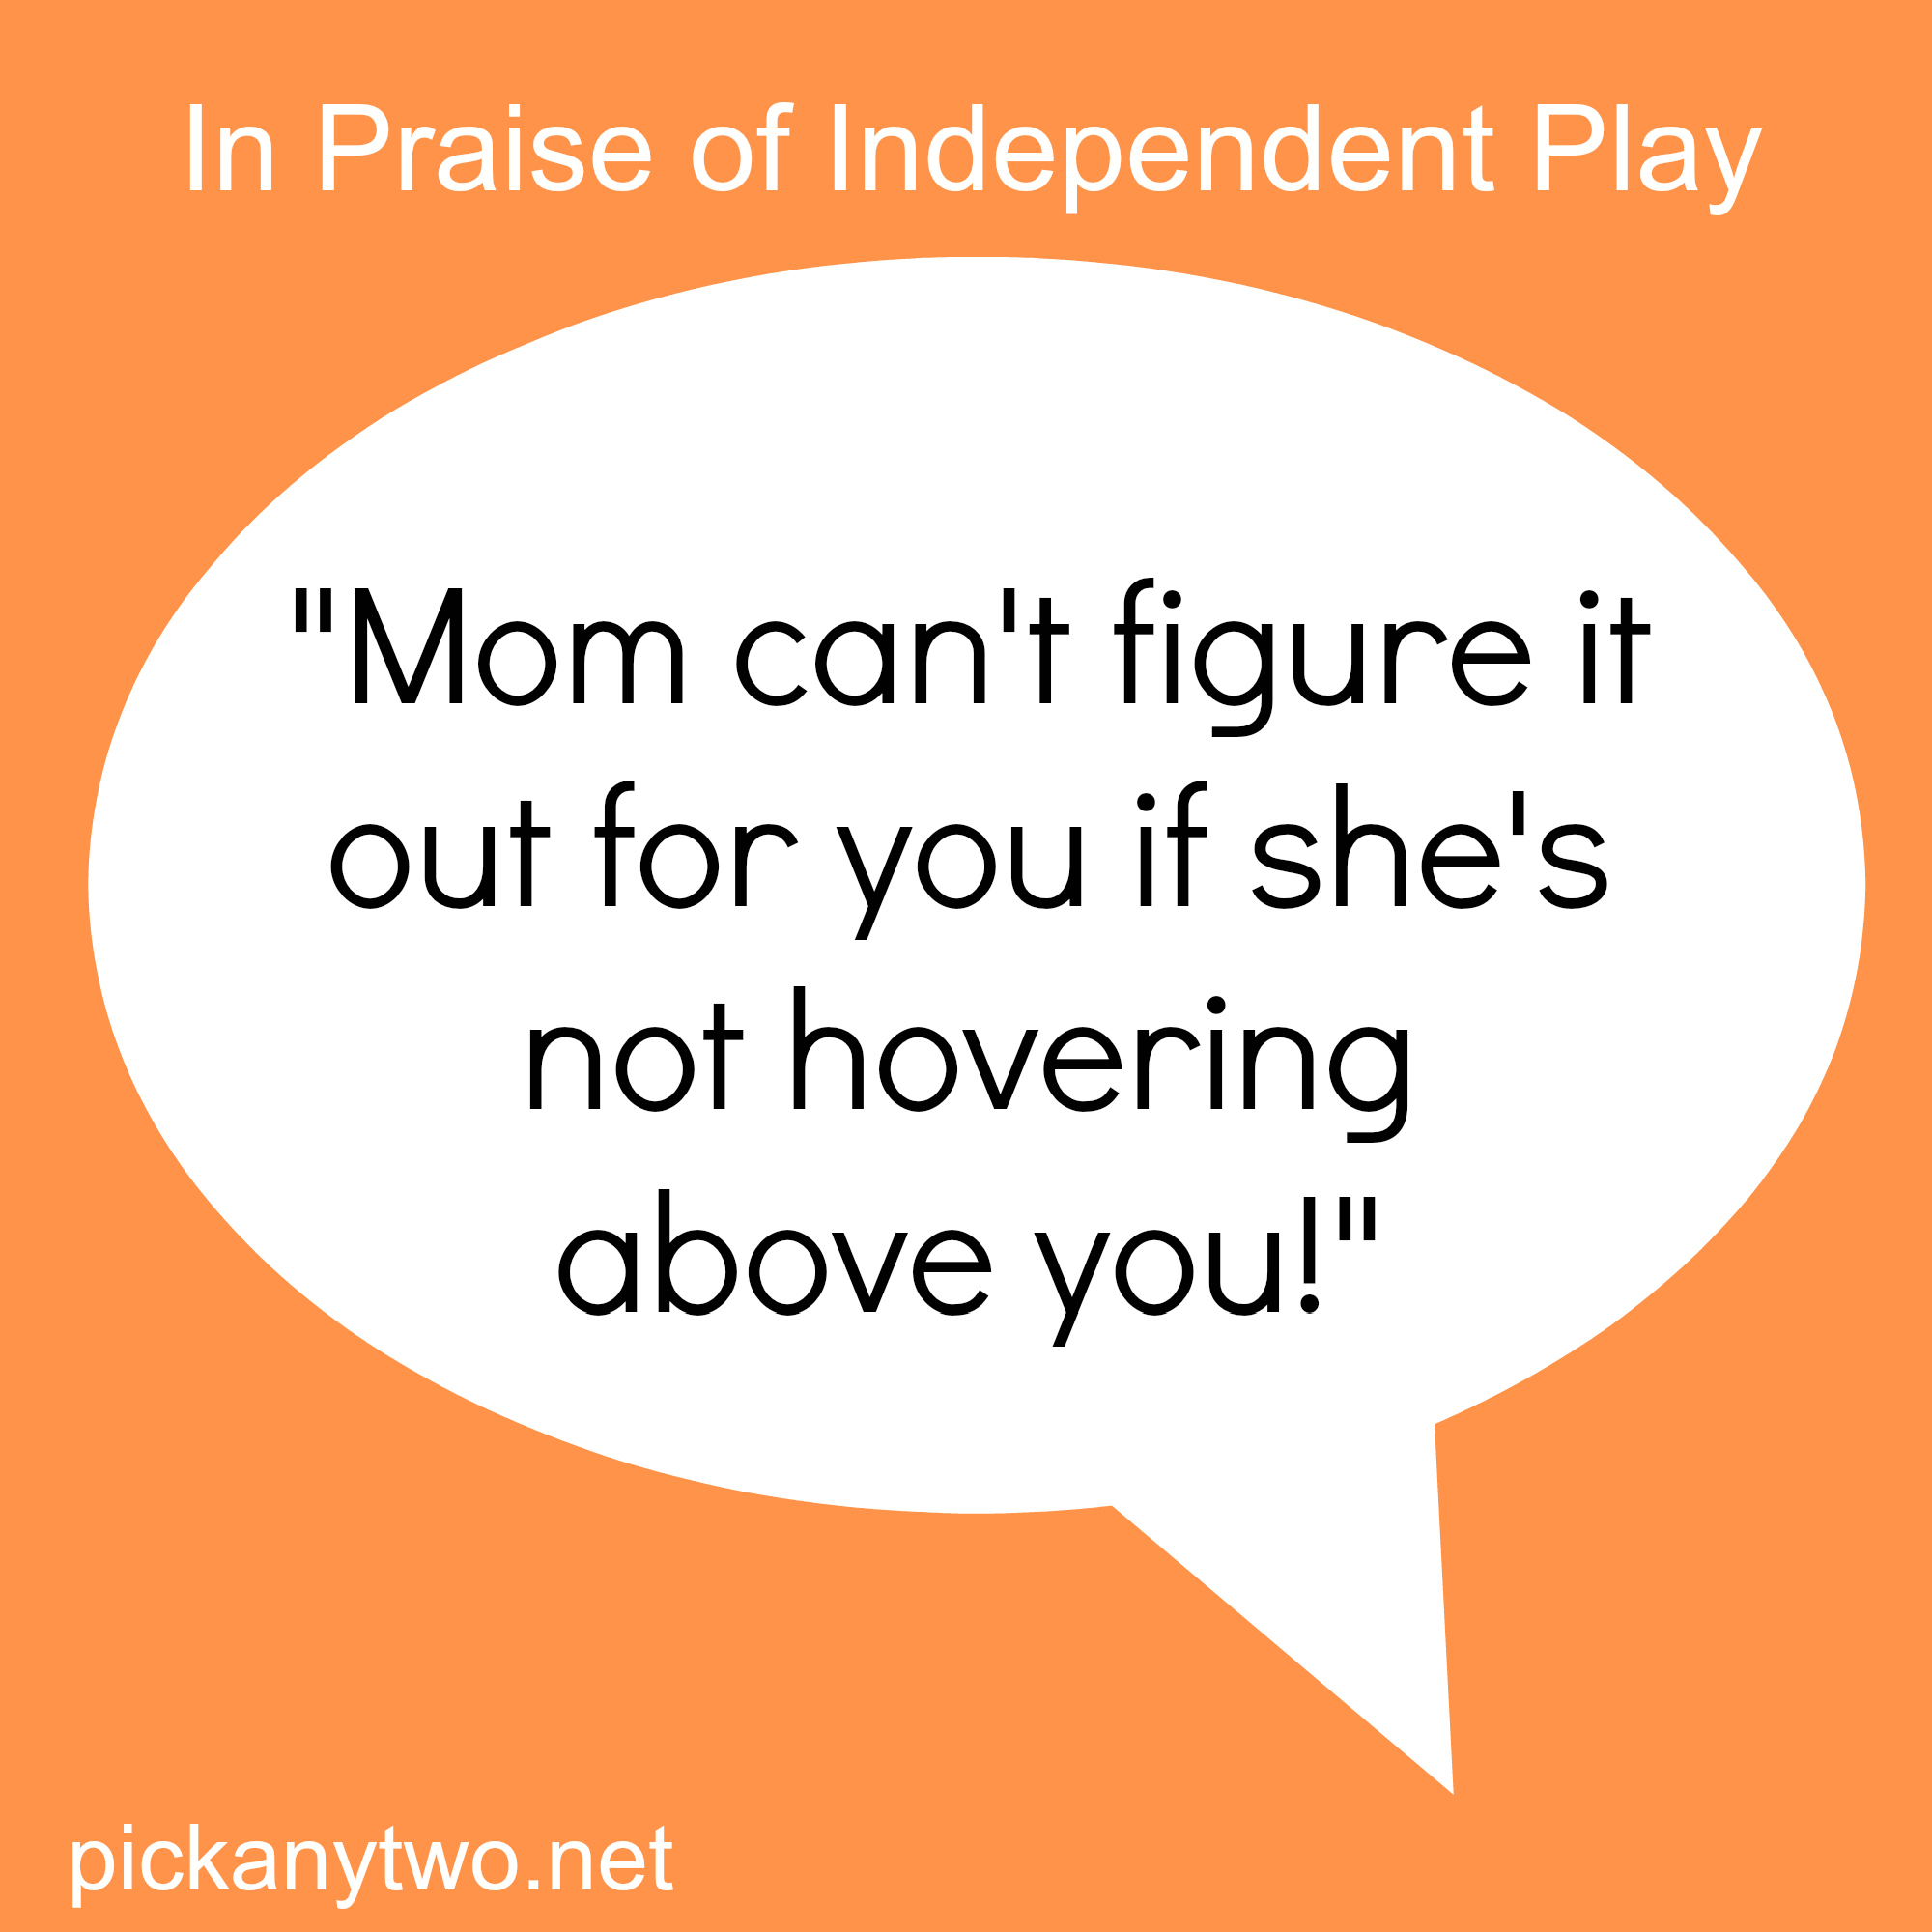 In Praise of Independent Play